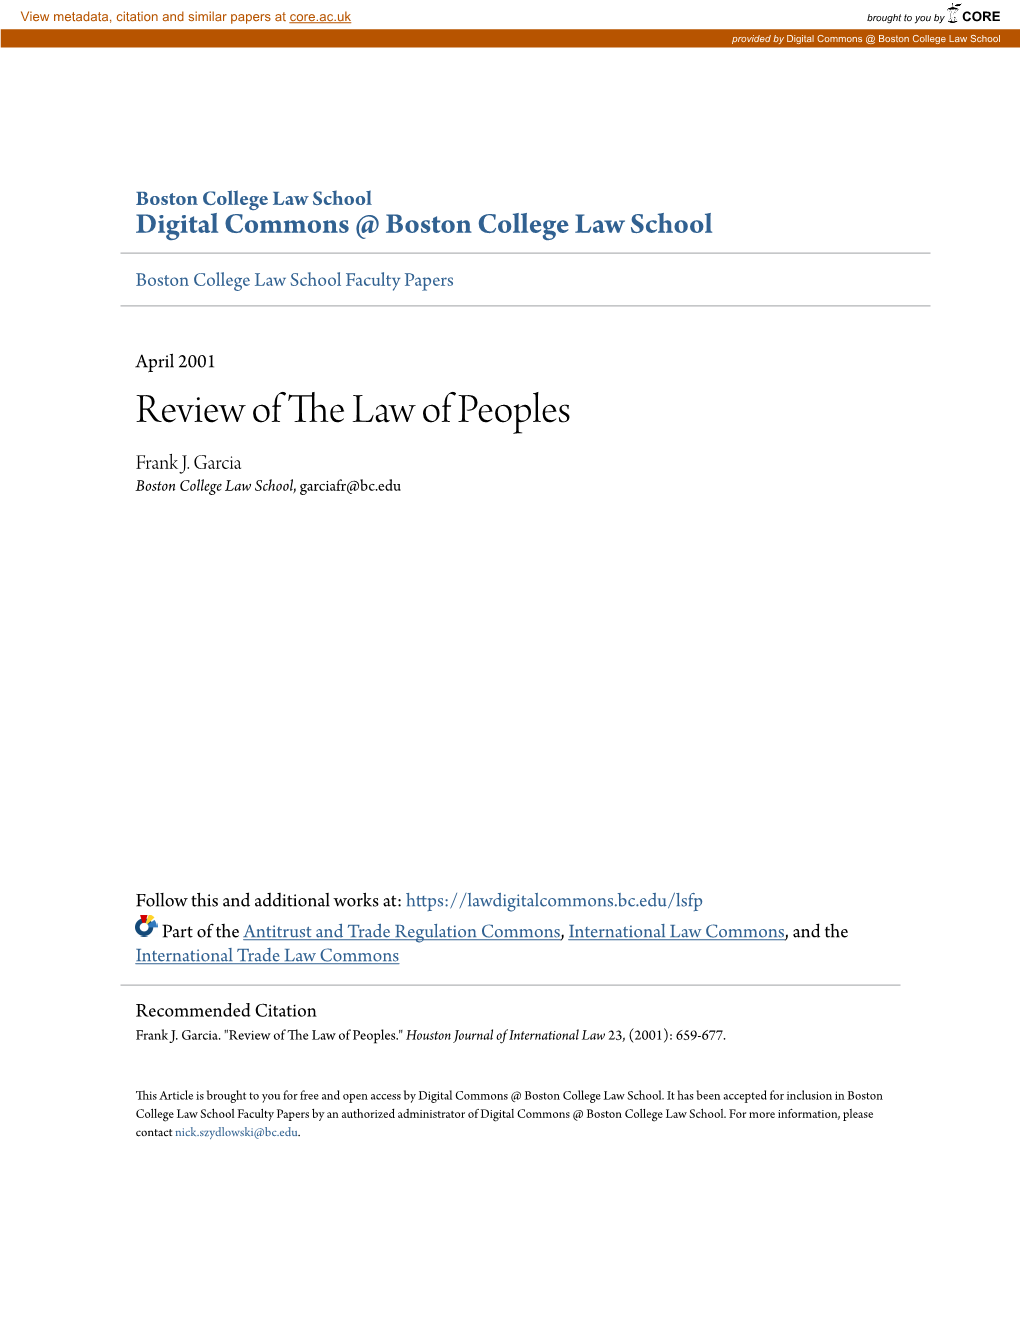 Review of the Law of Peoples Frank J